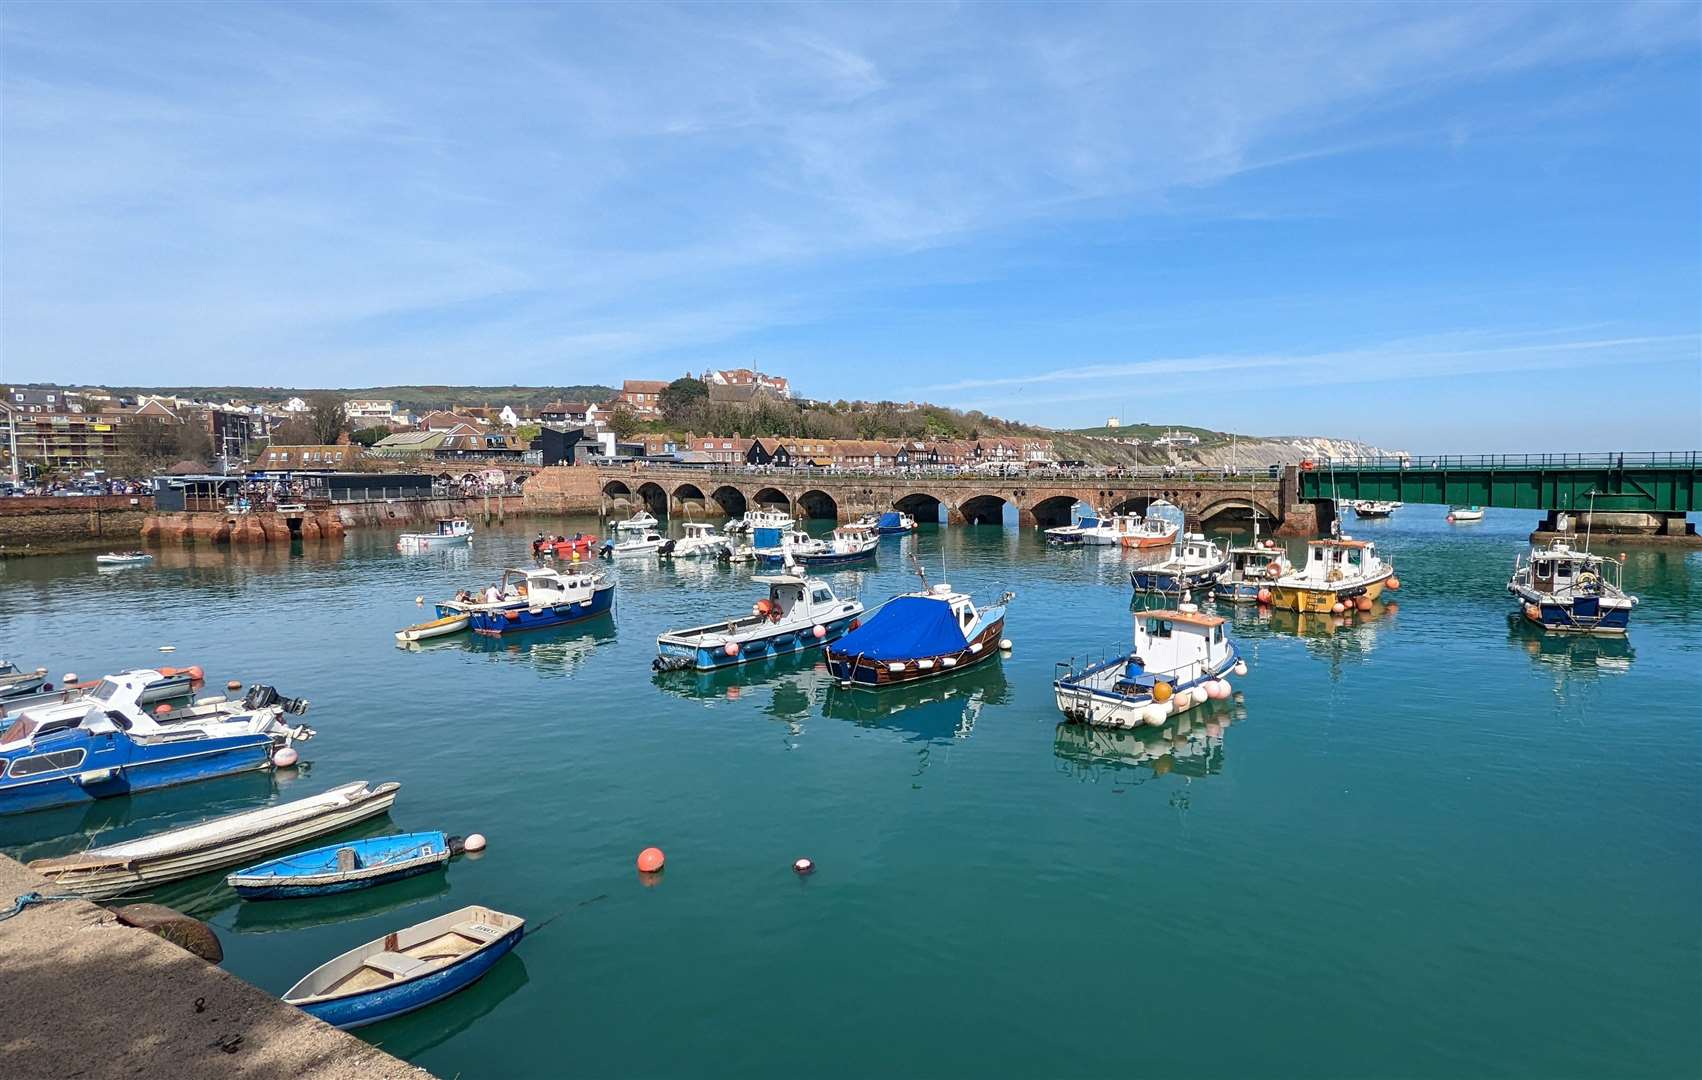 Folkestone Harbour has changed a great deal over the years